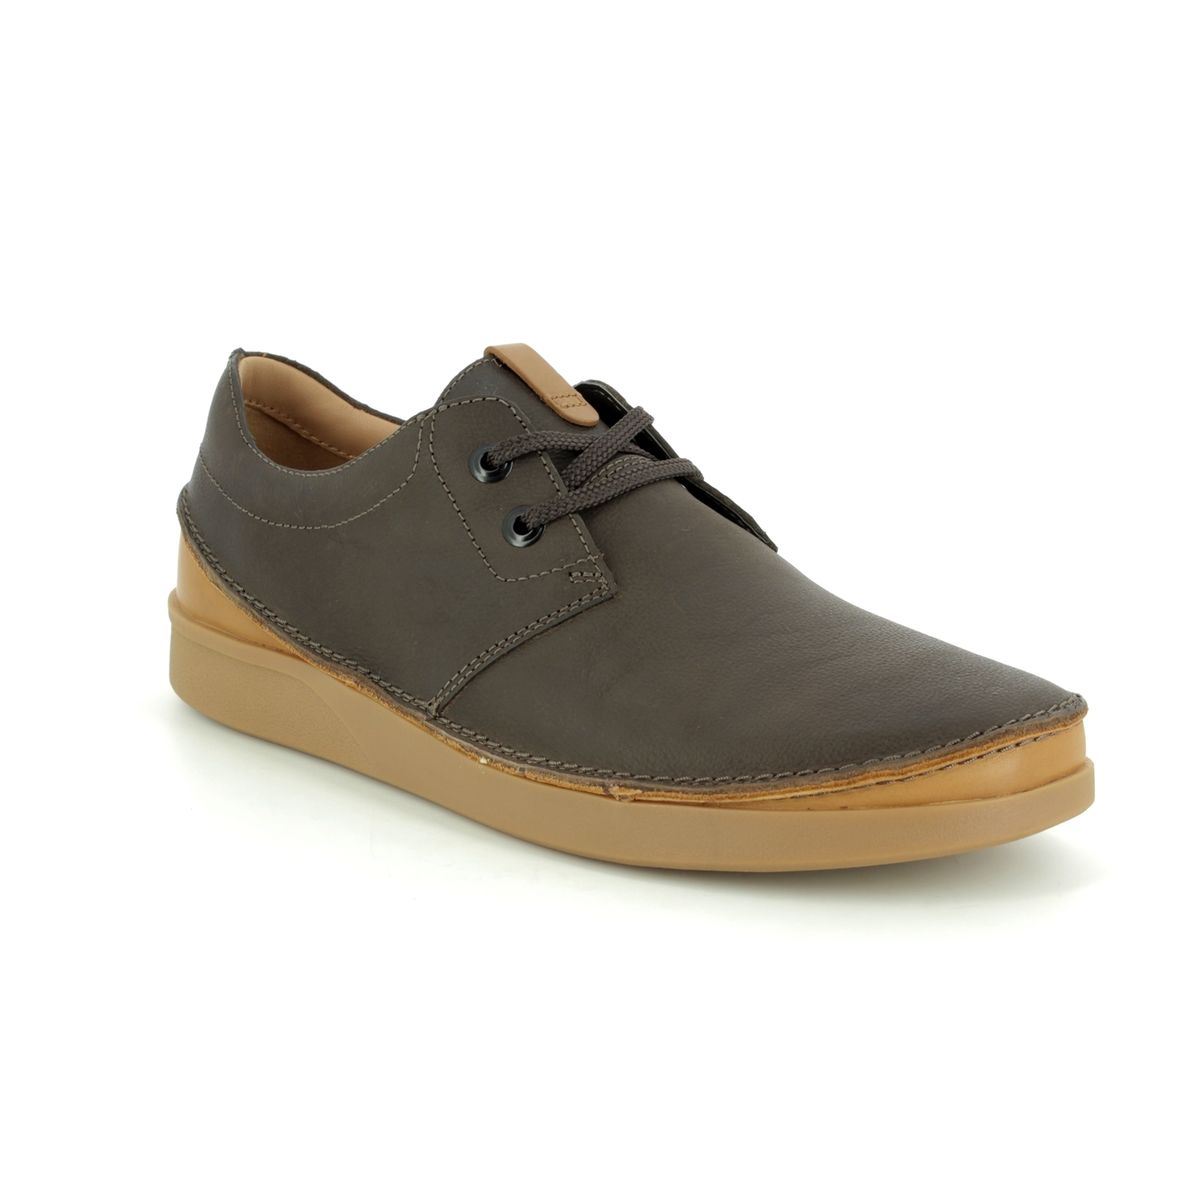 clarks casual sneakers off 71% - online 